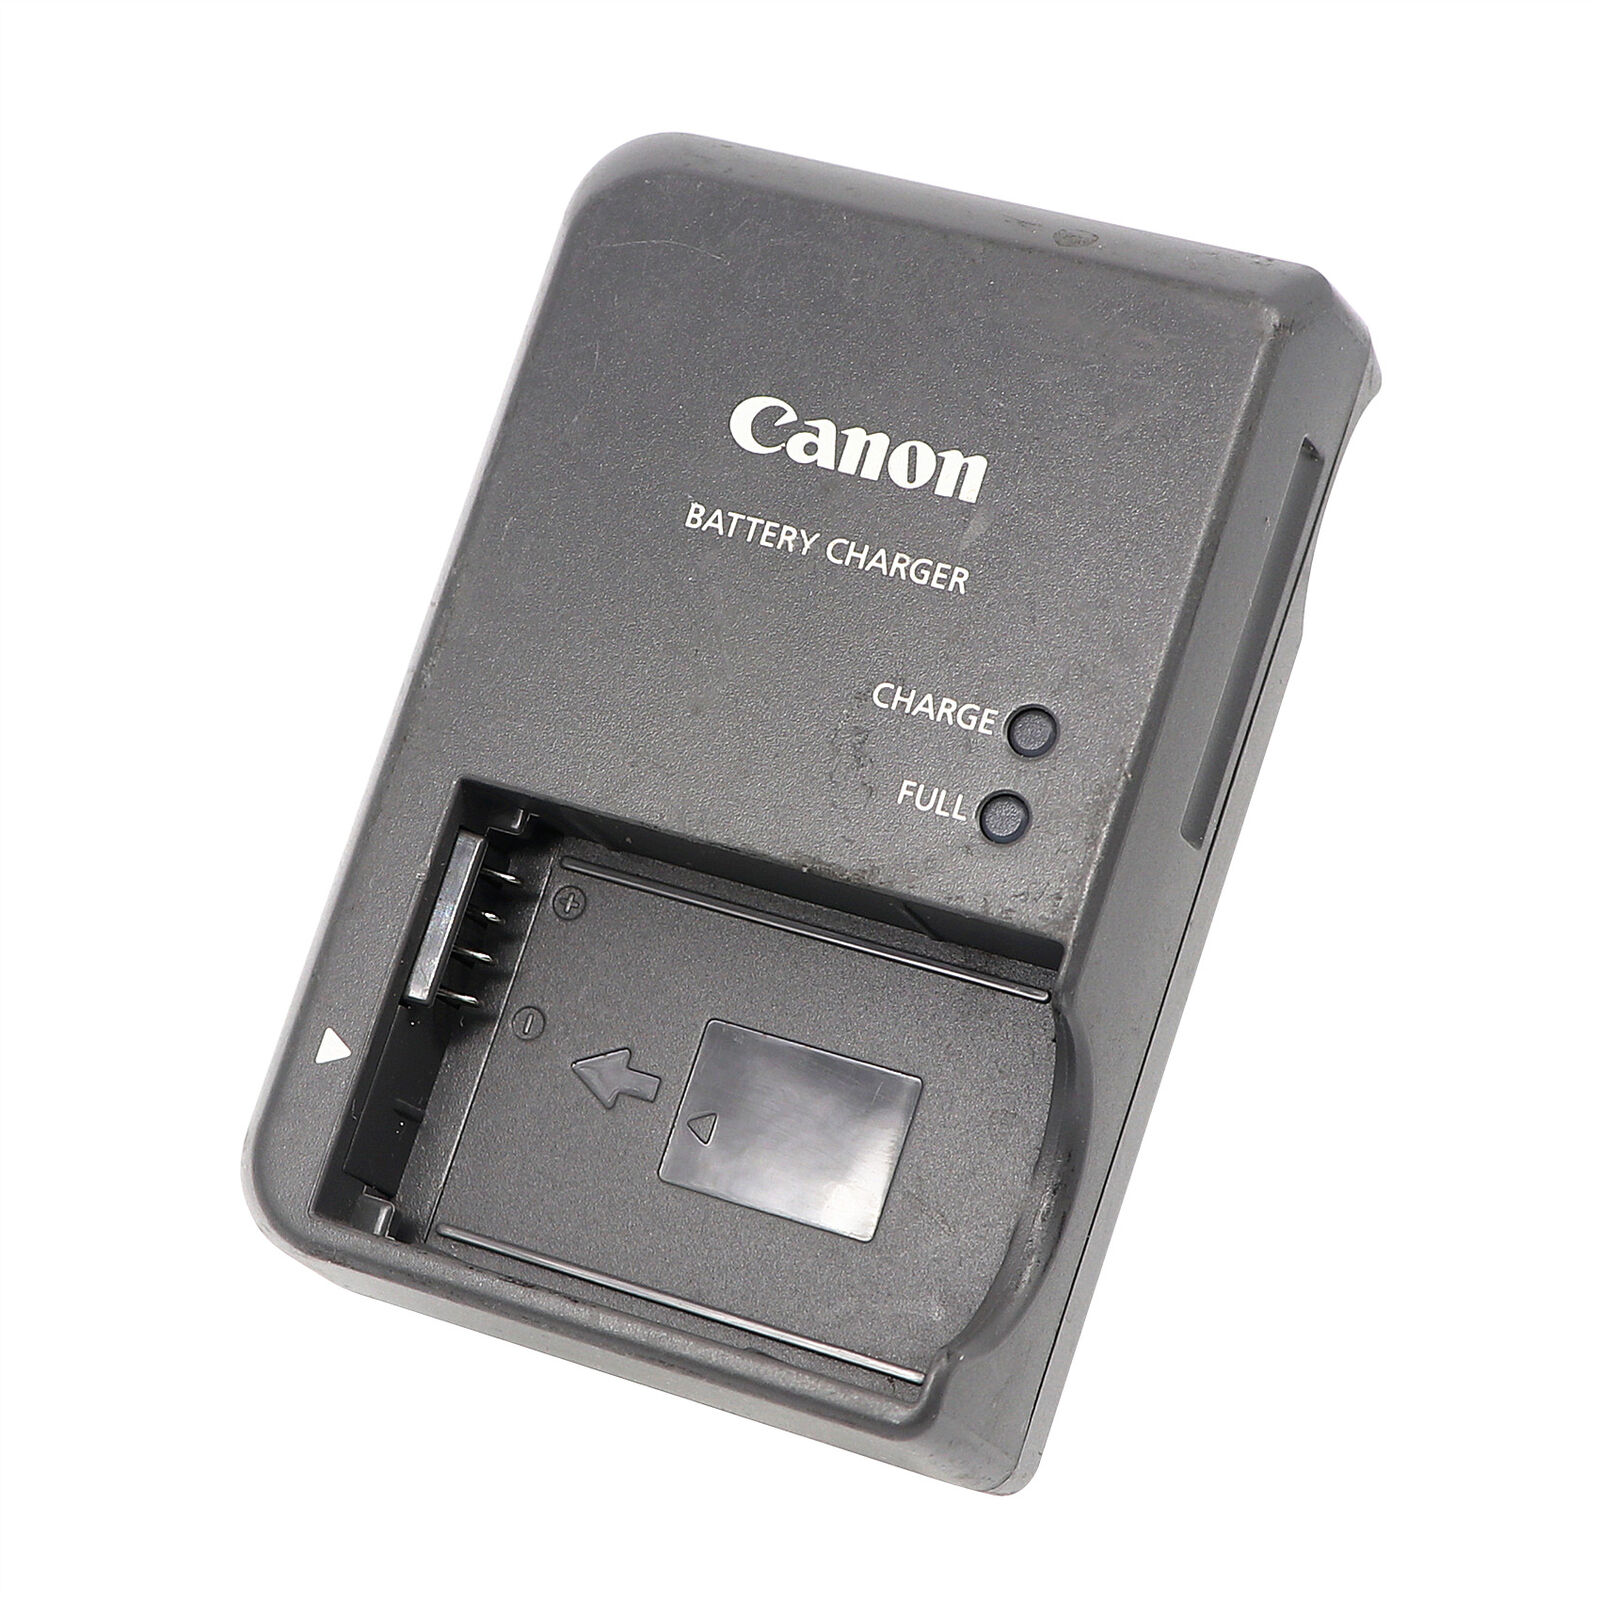 Original Canon CB-2LZ Charger For PowerShot G10 G11 G12 SX30 SX30IS IS NB-7L Brand Canon Type Chargers To Fit Camer